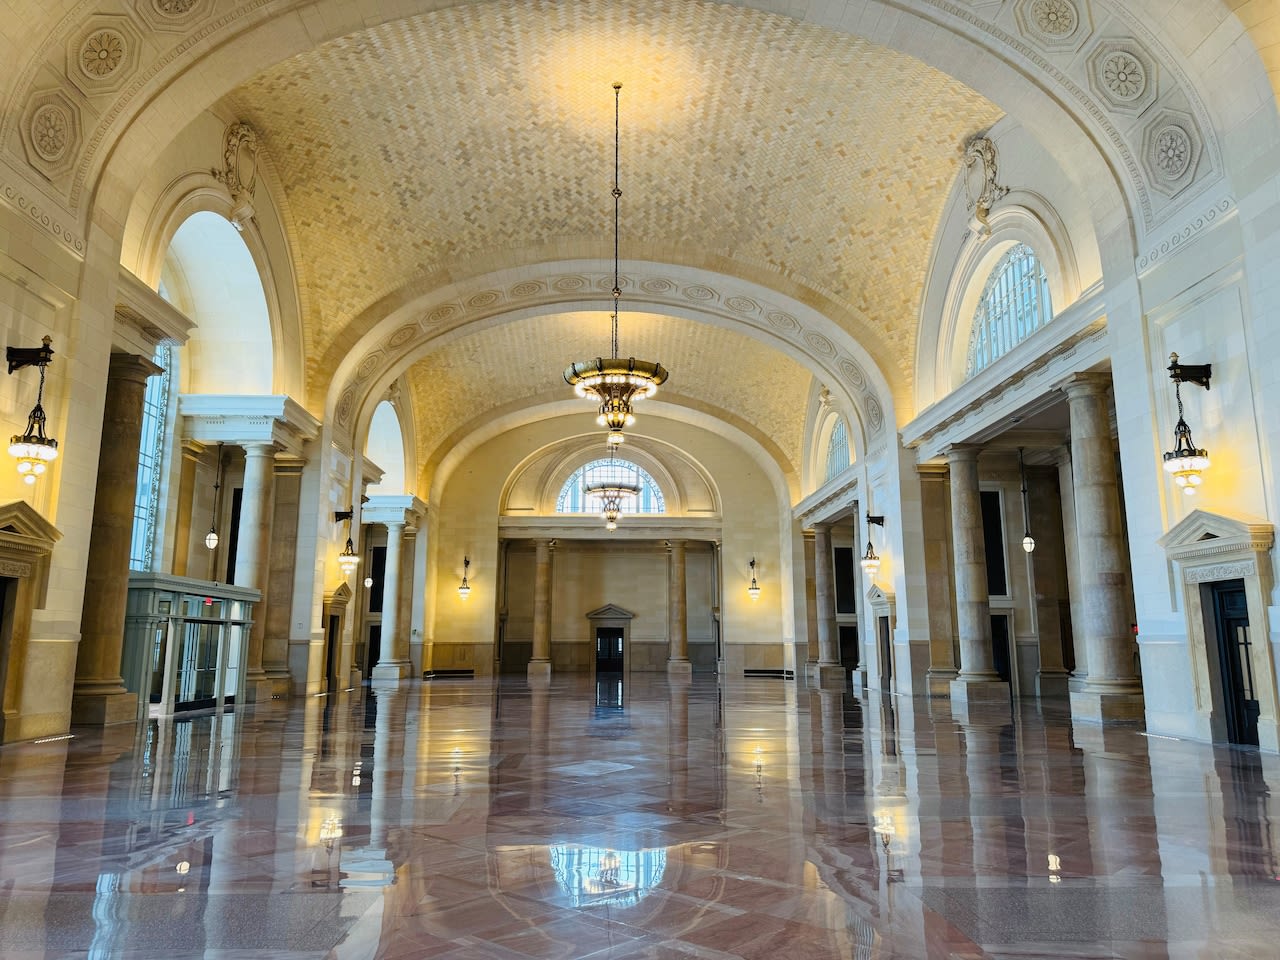 A video tour inside the restored architectural wonder, Michigan Central Station